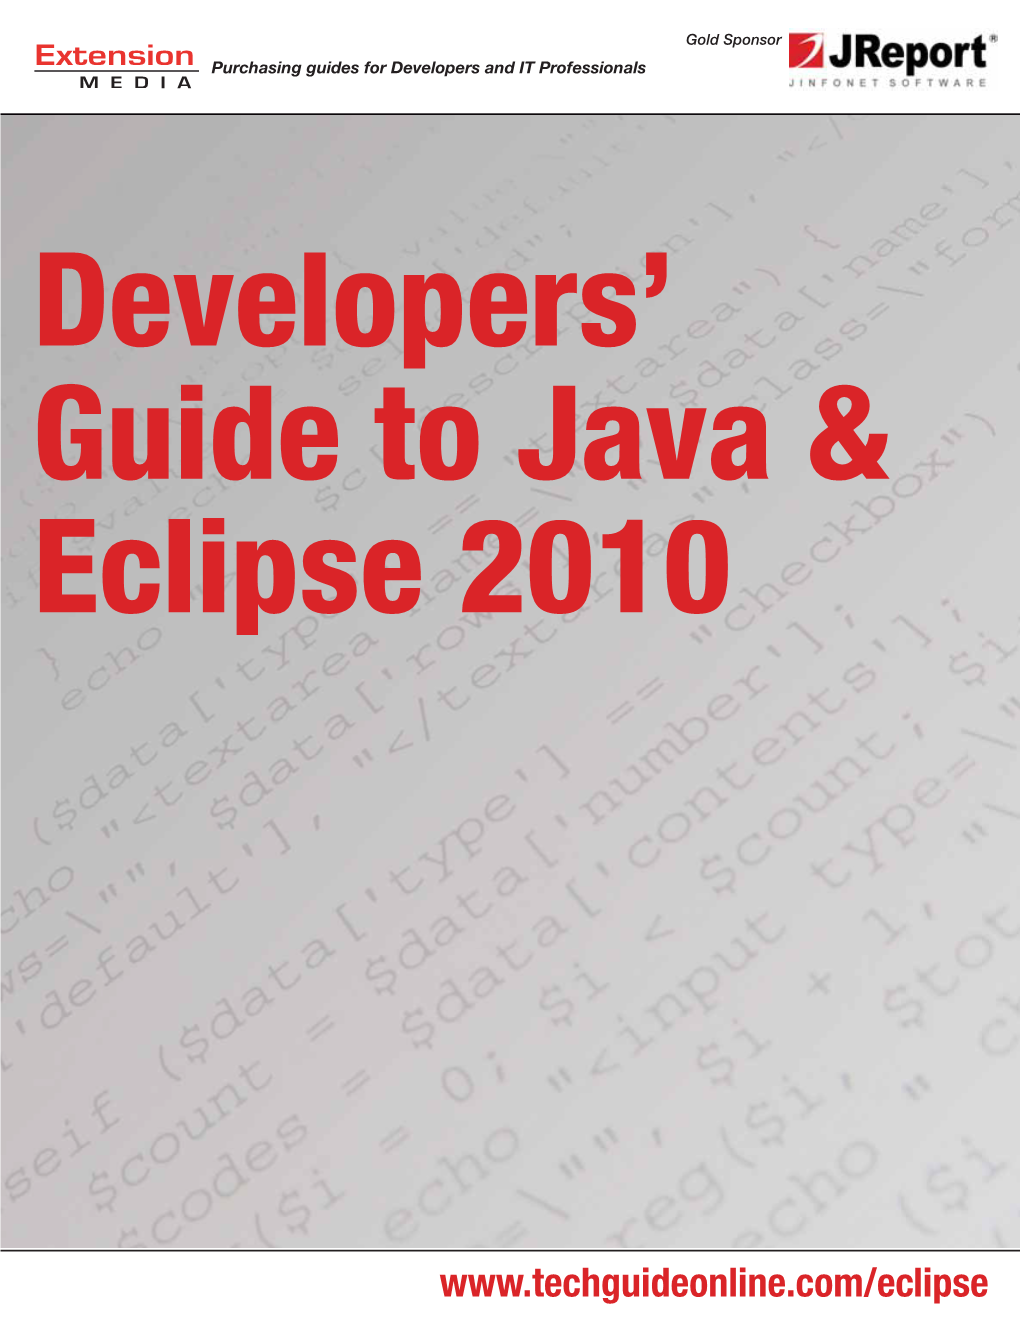 Developers' Guide to Java & Eclipse 2010